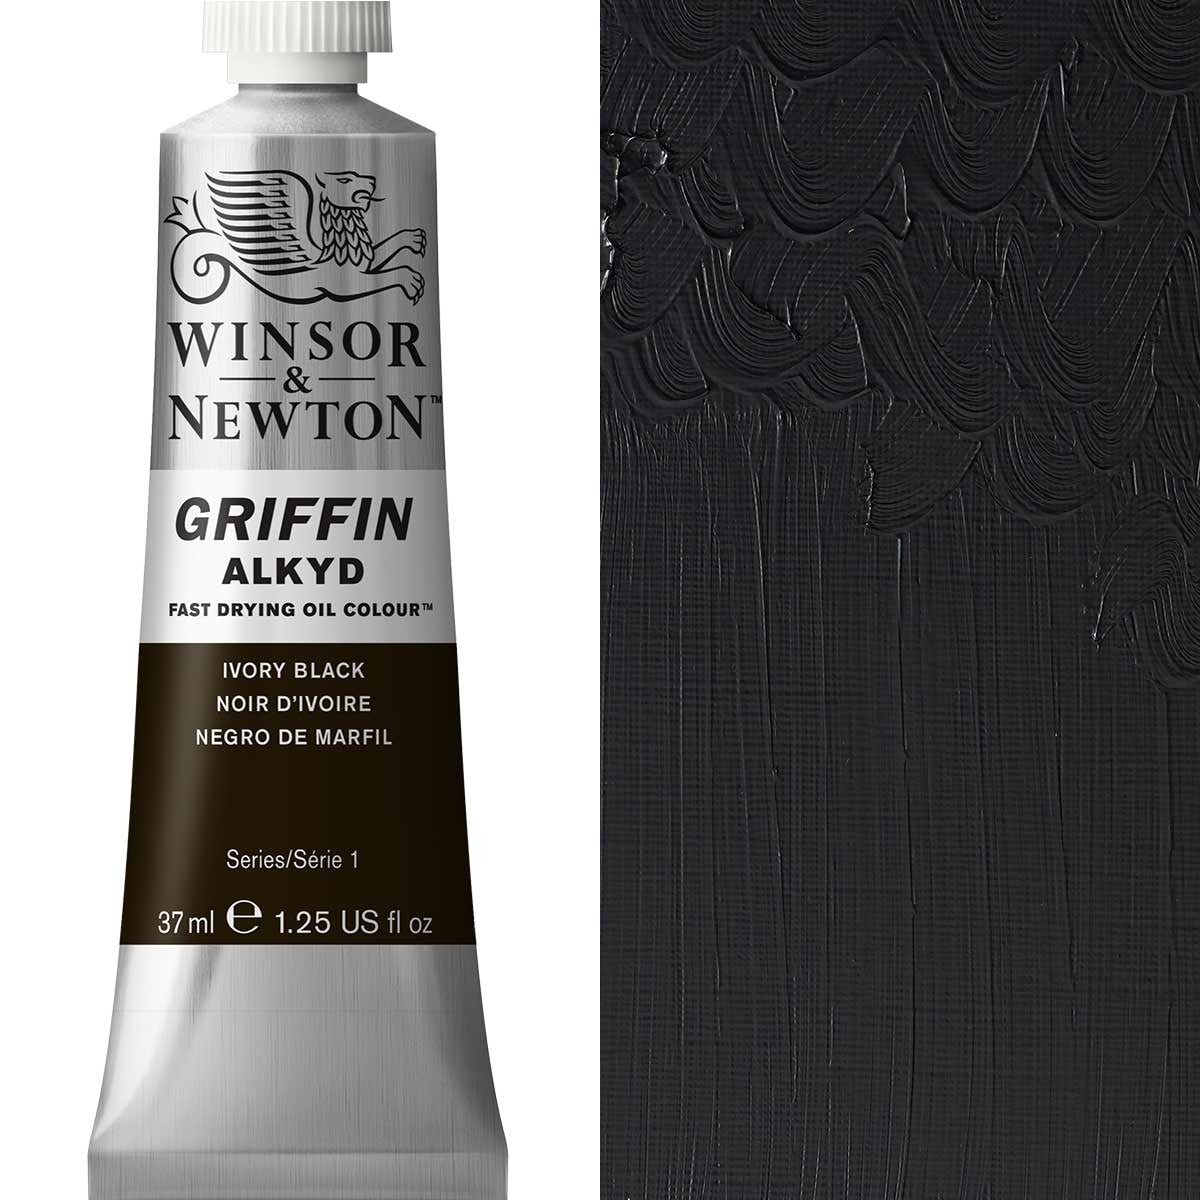 Winsor and Newton - Griffin ALKYD Oil Colour - 37ml - Ivory Black